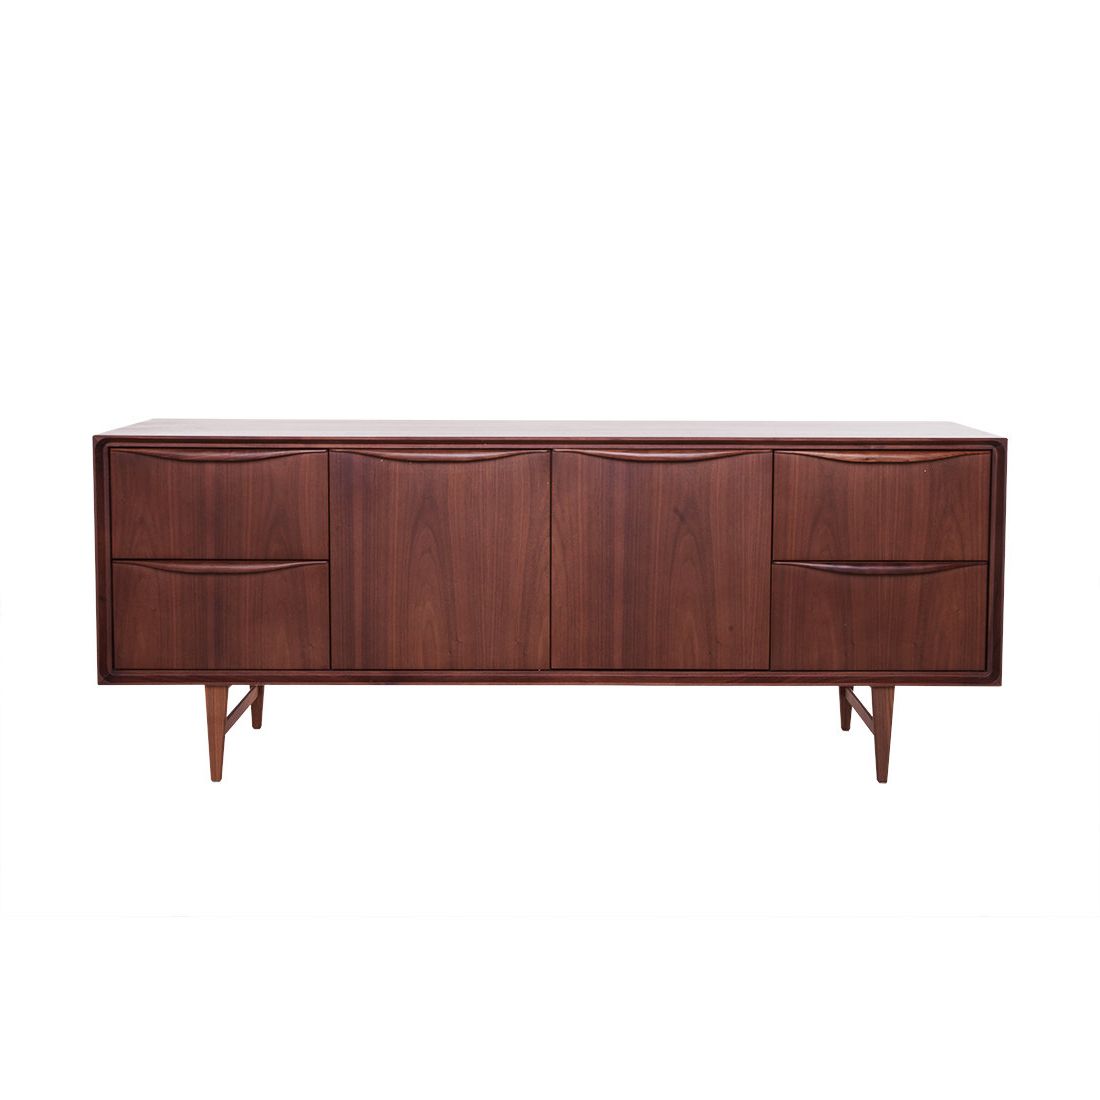 Emiliano Sideboards Throughout Popular Red Wood Sideboard / Credenza Sideboards & Buffets You'll (View 18 of 20)